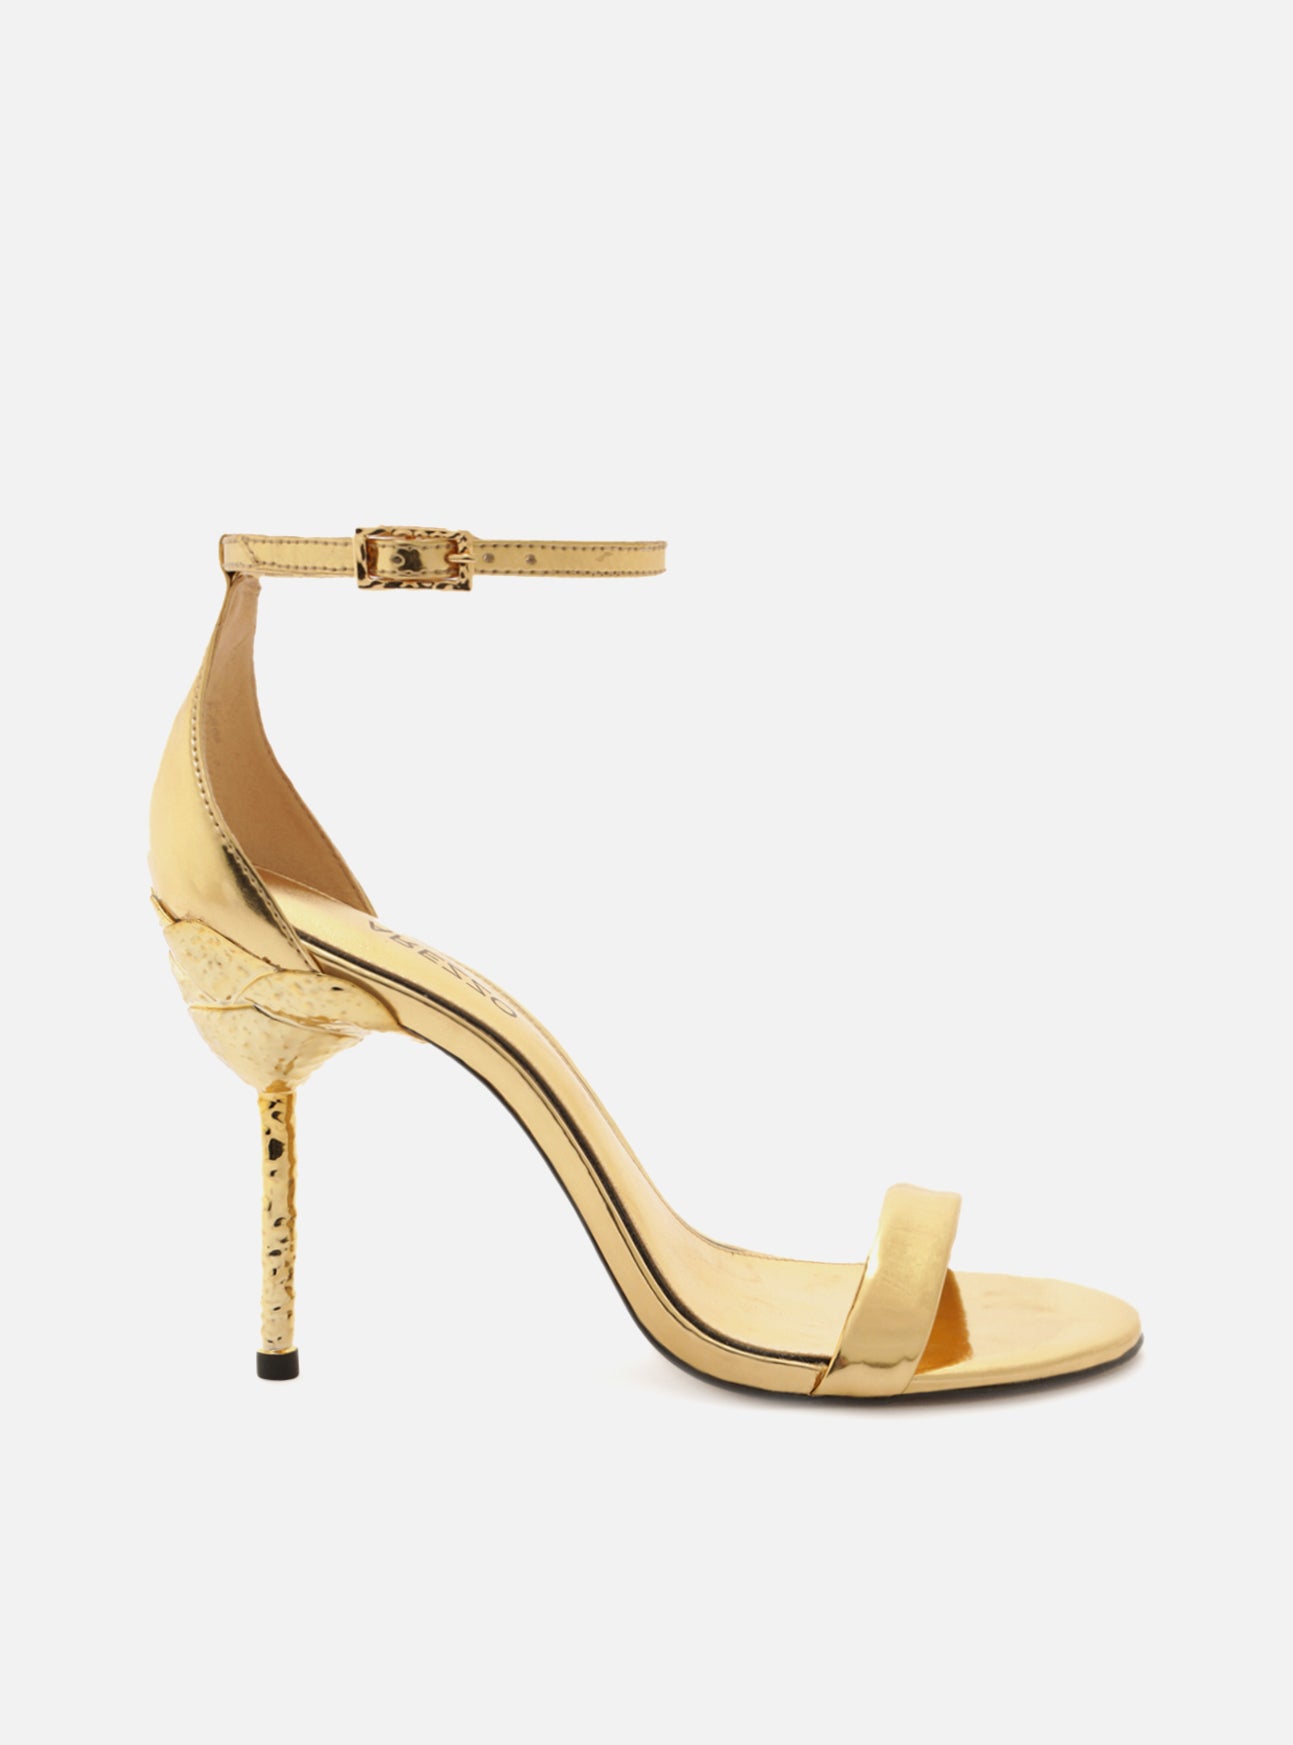 Metallic Gold sandal with a high stiletto heel in hammered gold metal and a rounded toe. Closed heel and ankle strap.